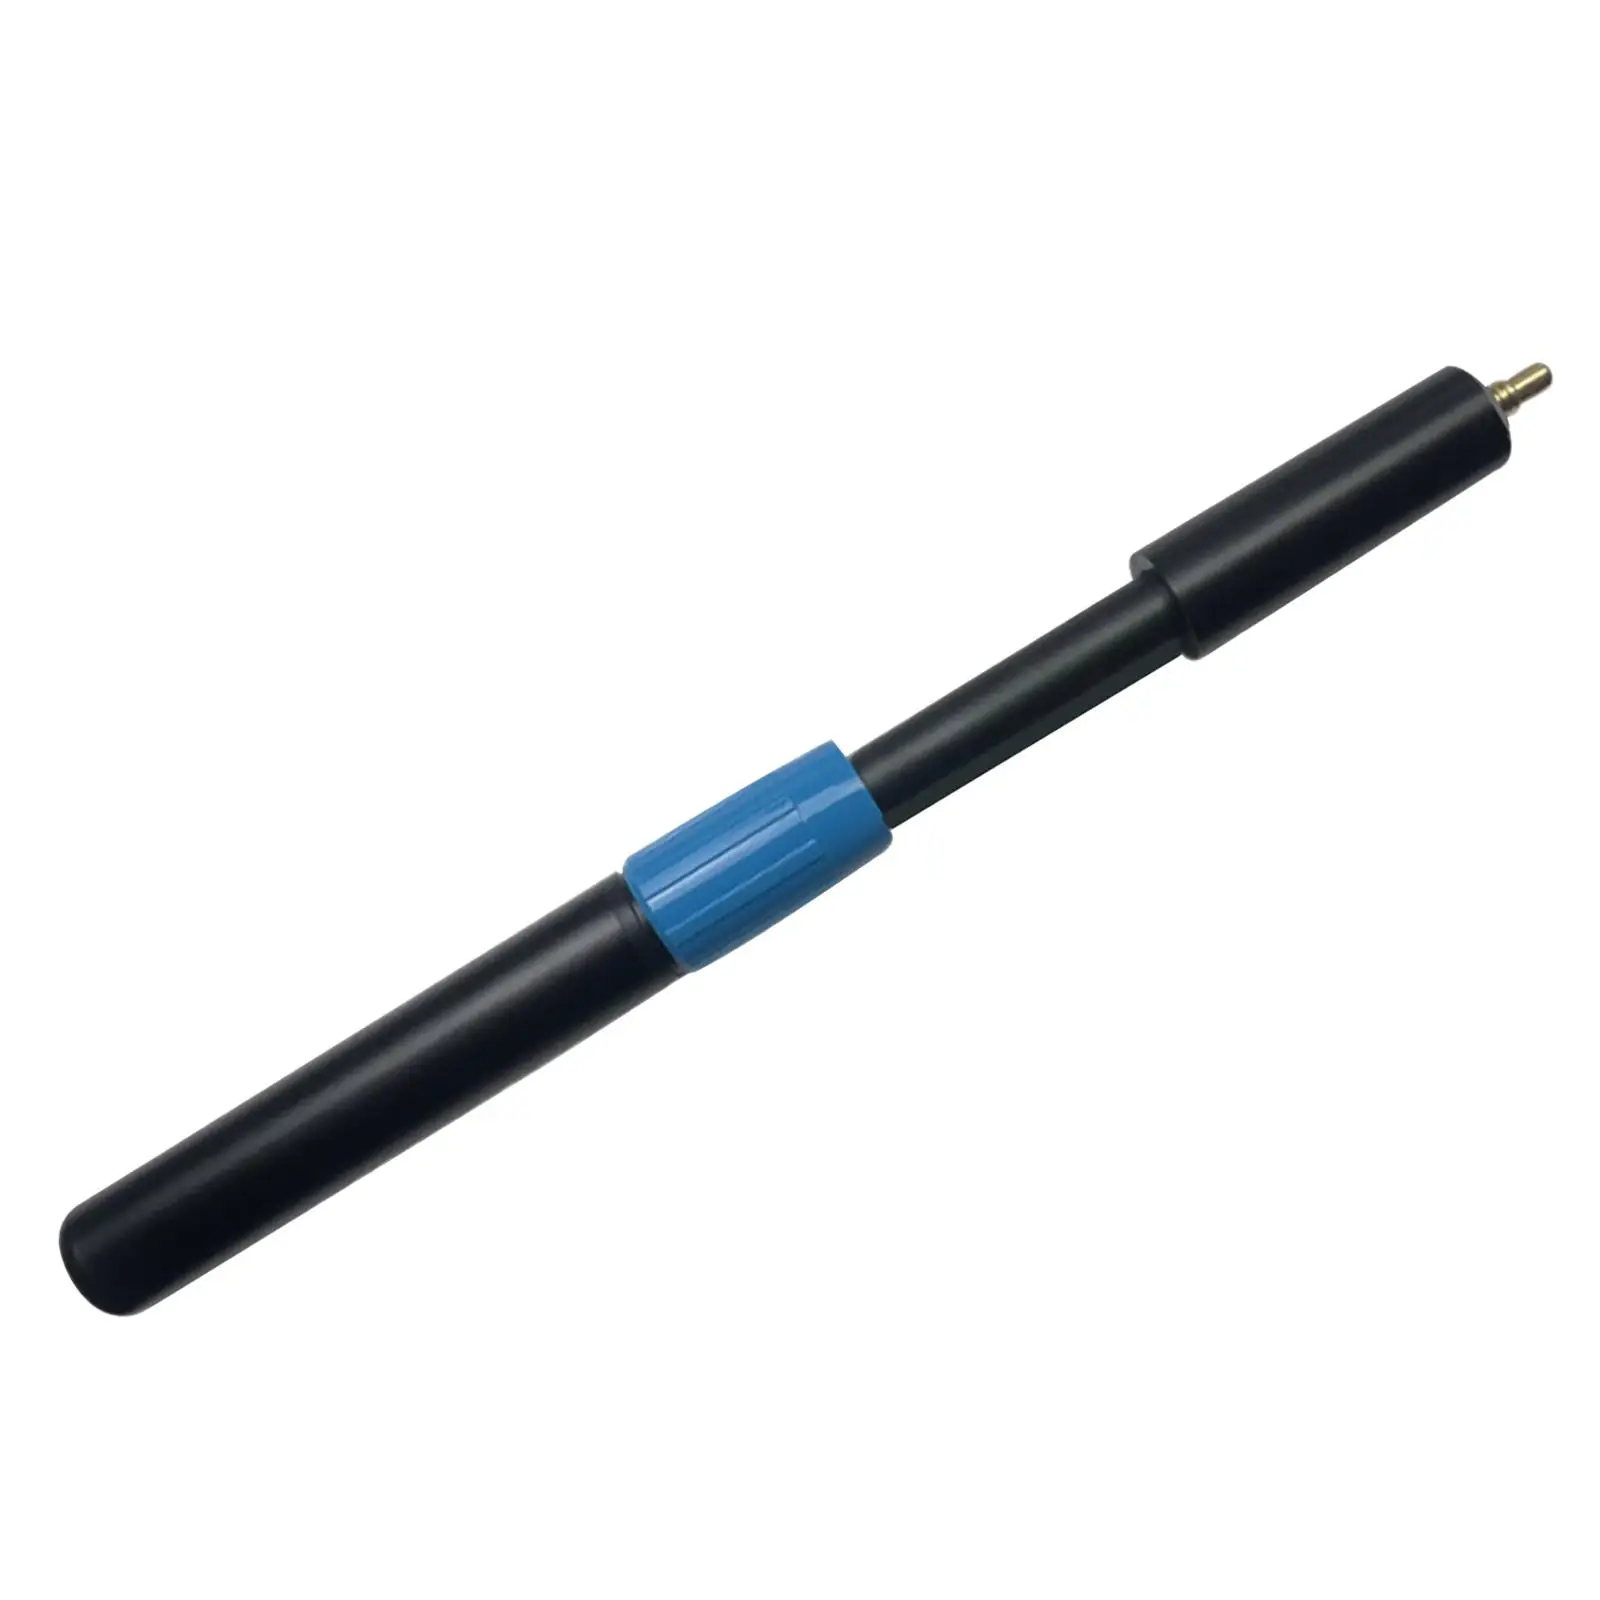 Lightweight Snooker Cue Extender, Durable Snooker Cue Extension Tool, Alloy